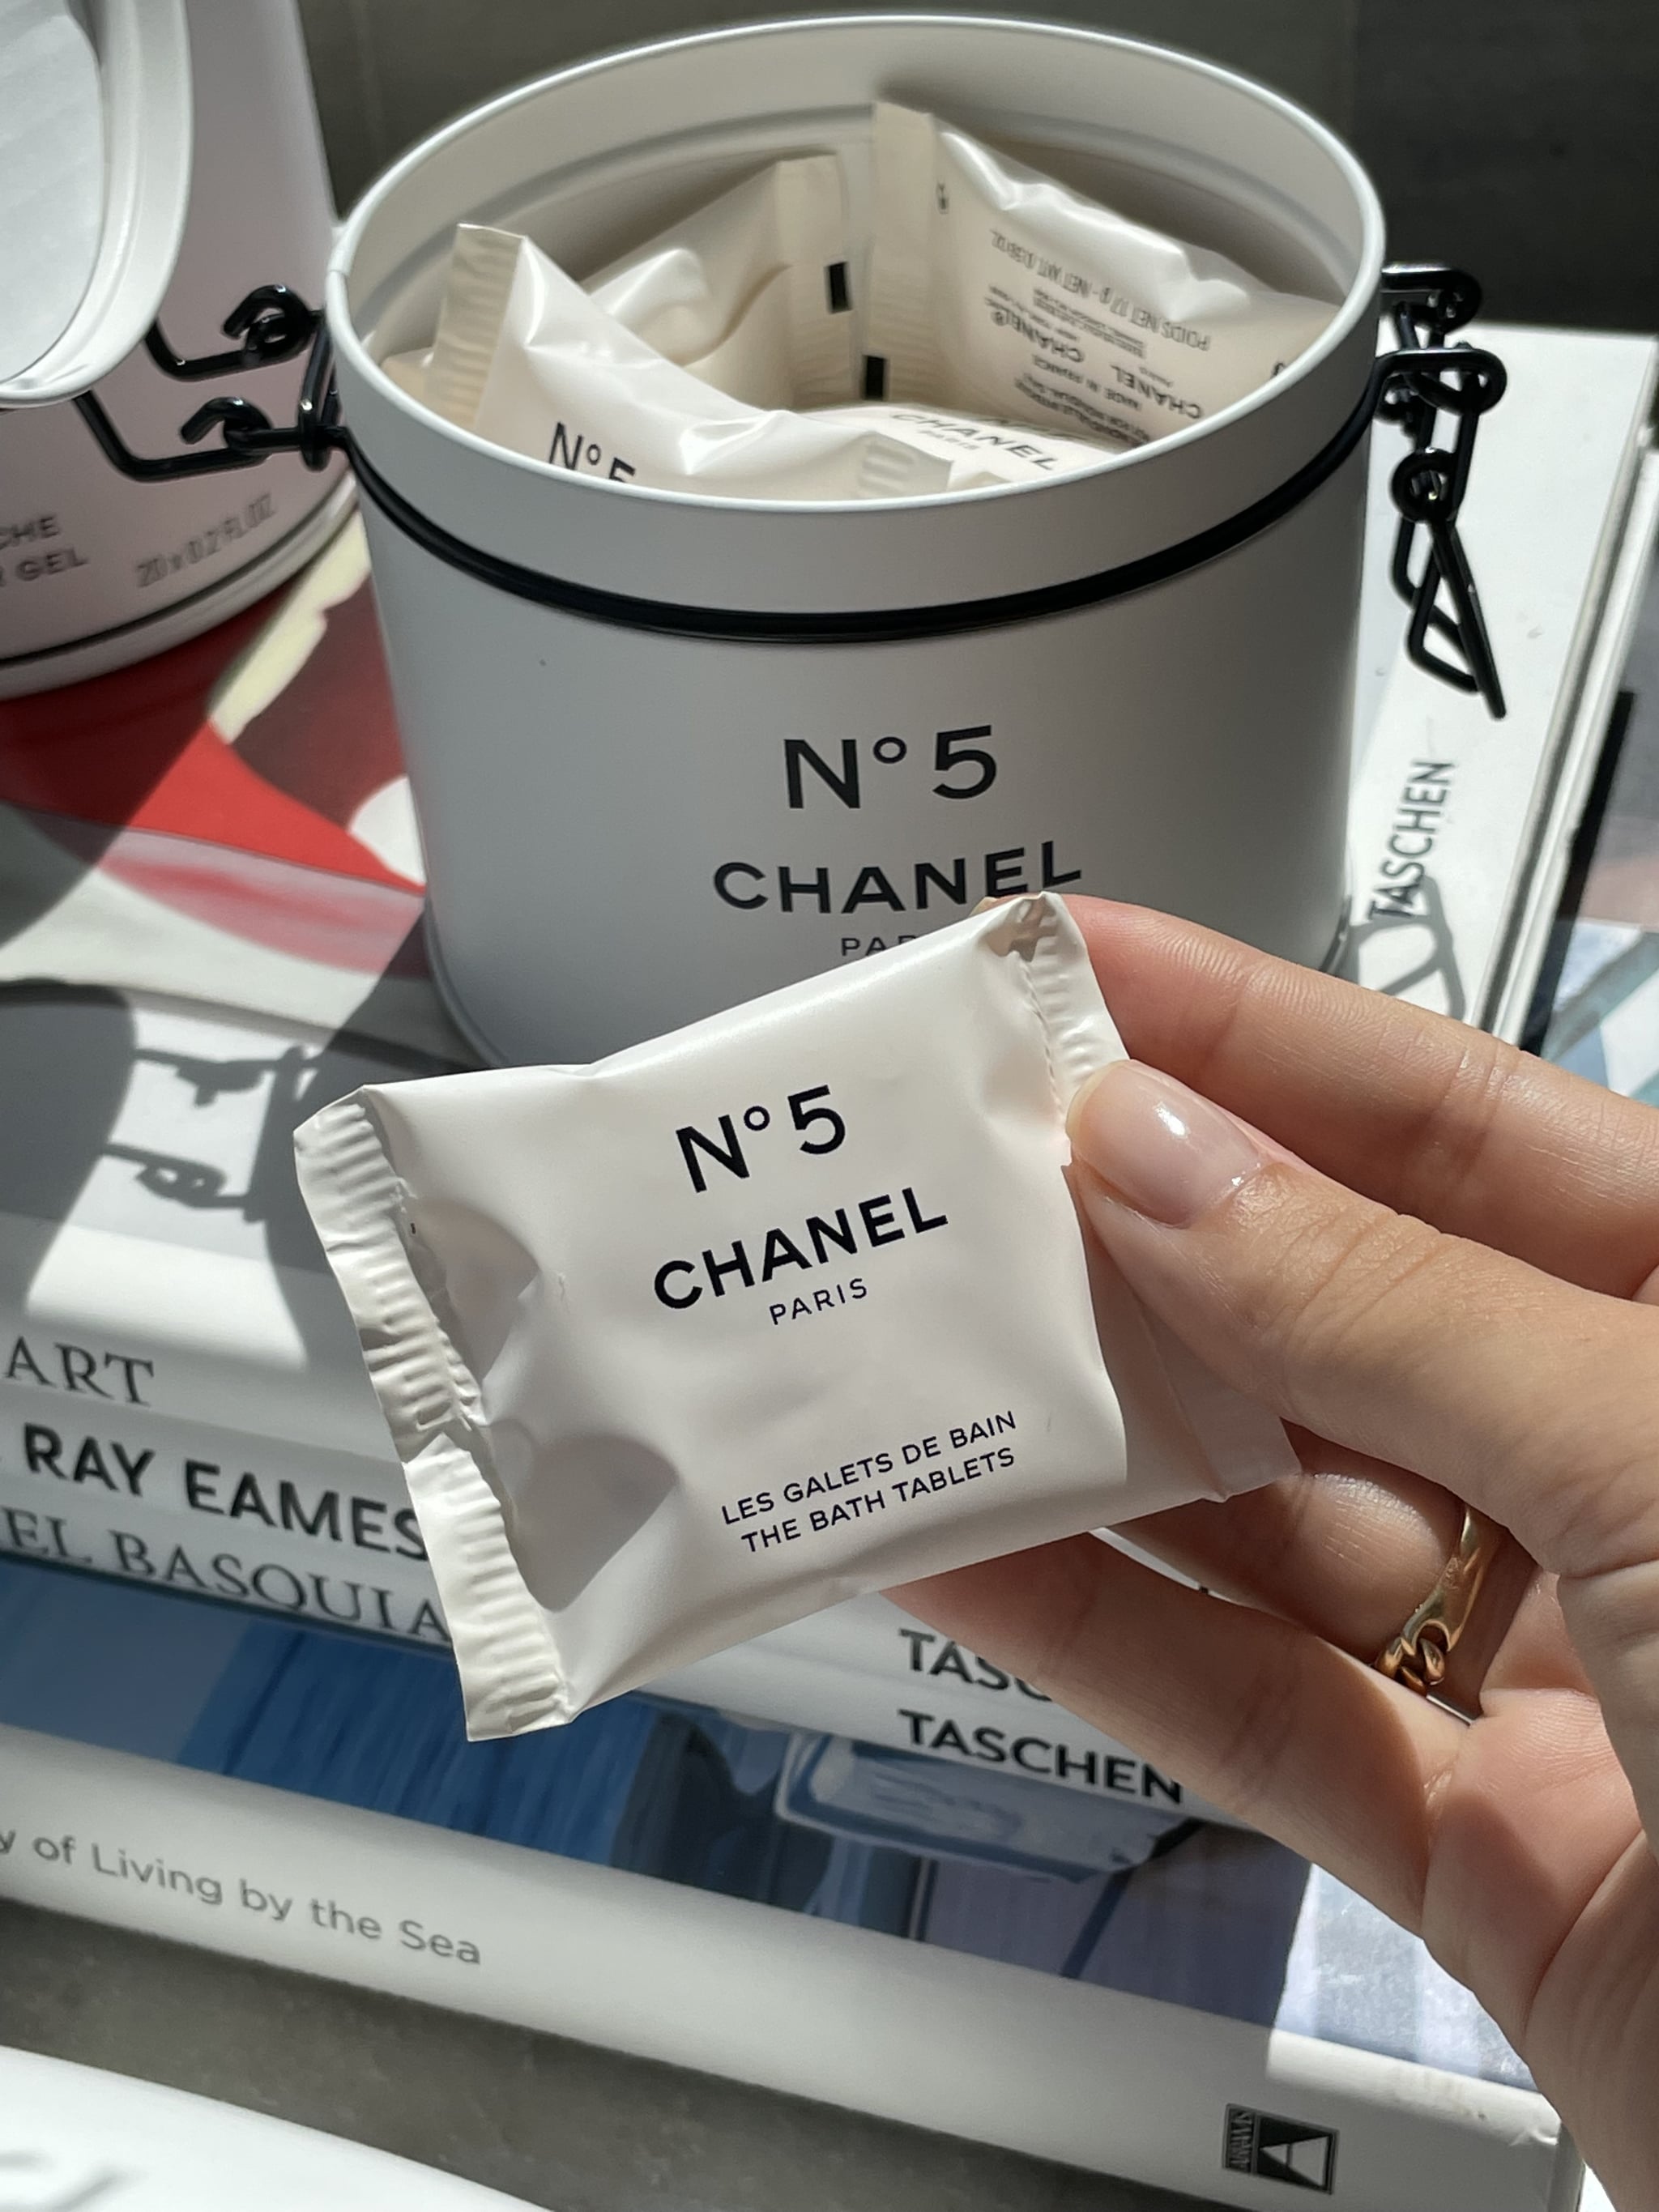 CHANEL Chance Eau Tendre Scented Bath Tablets  British Beauty Blogger